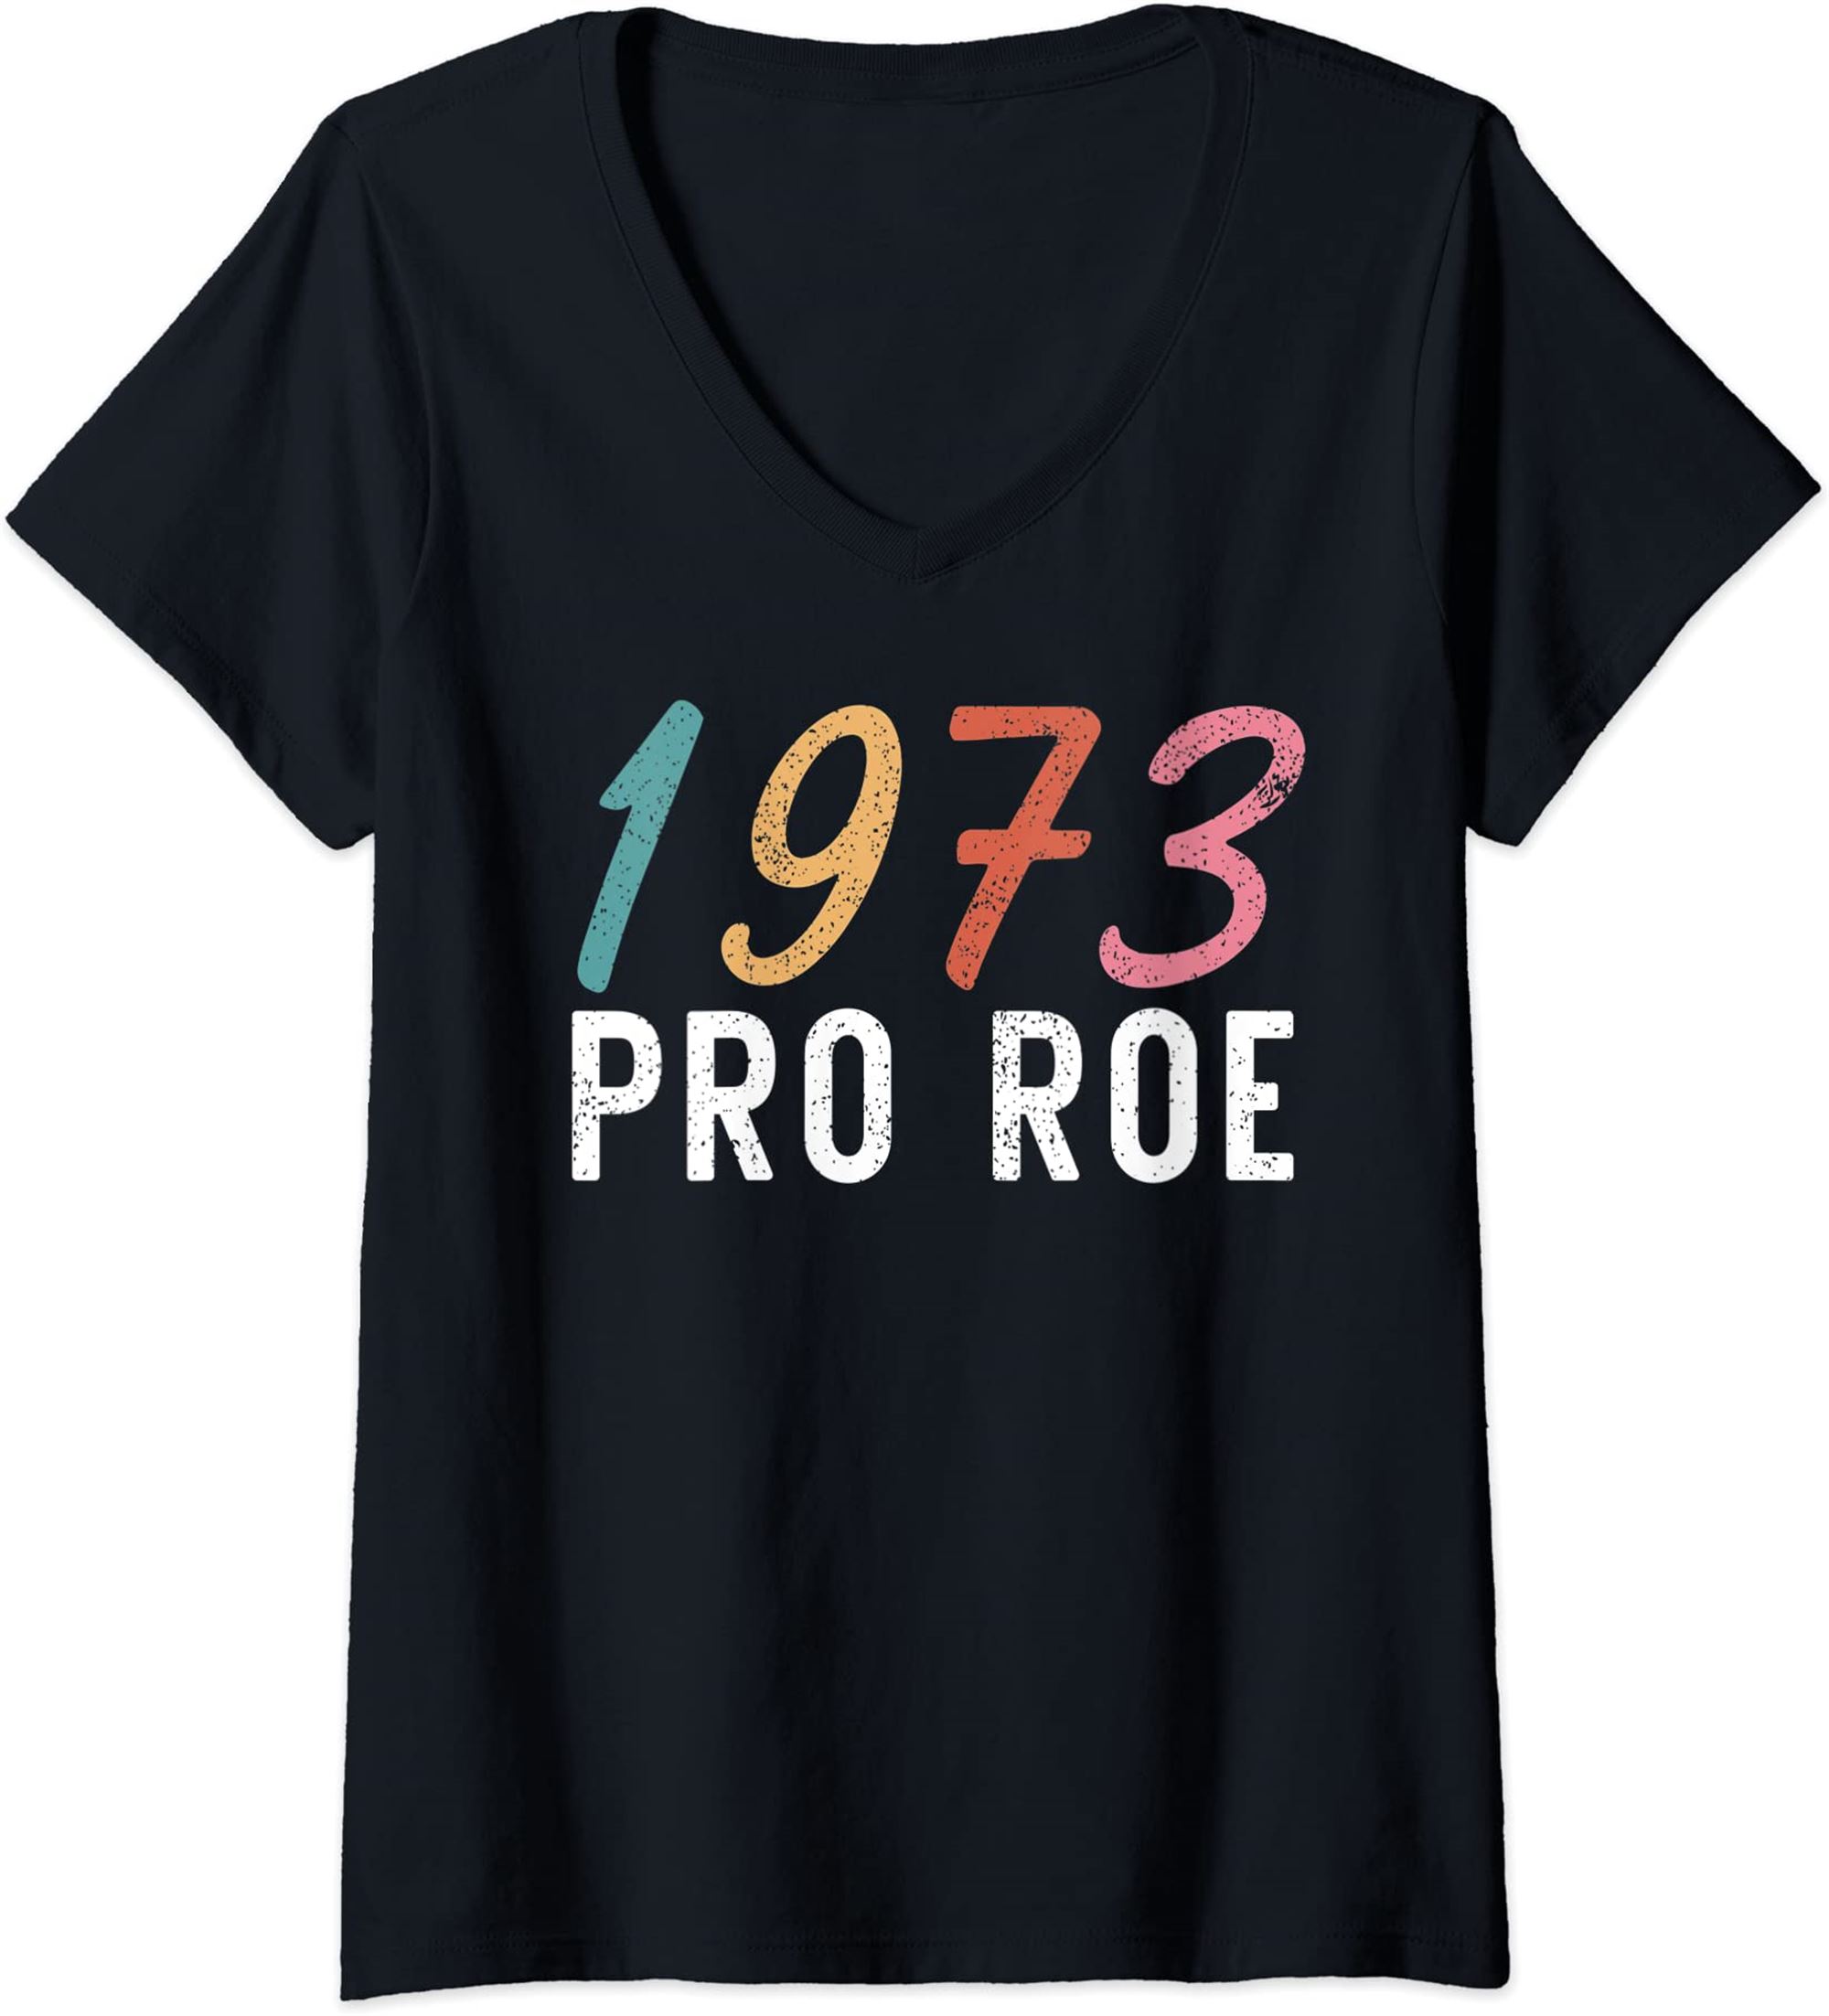 Womens Pro Roe 1973 Vintage V Neck Tshirt Plus Size Up To 5xl